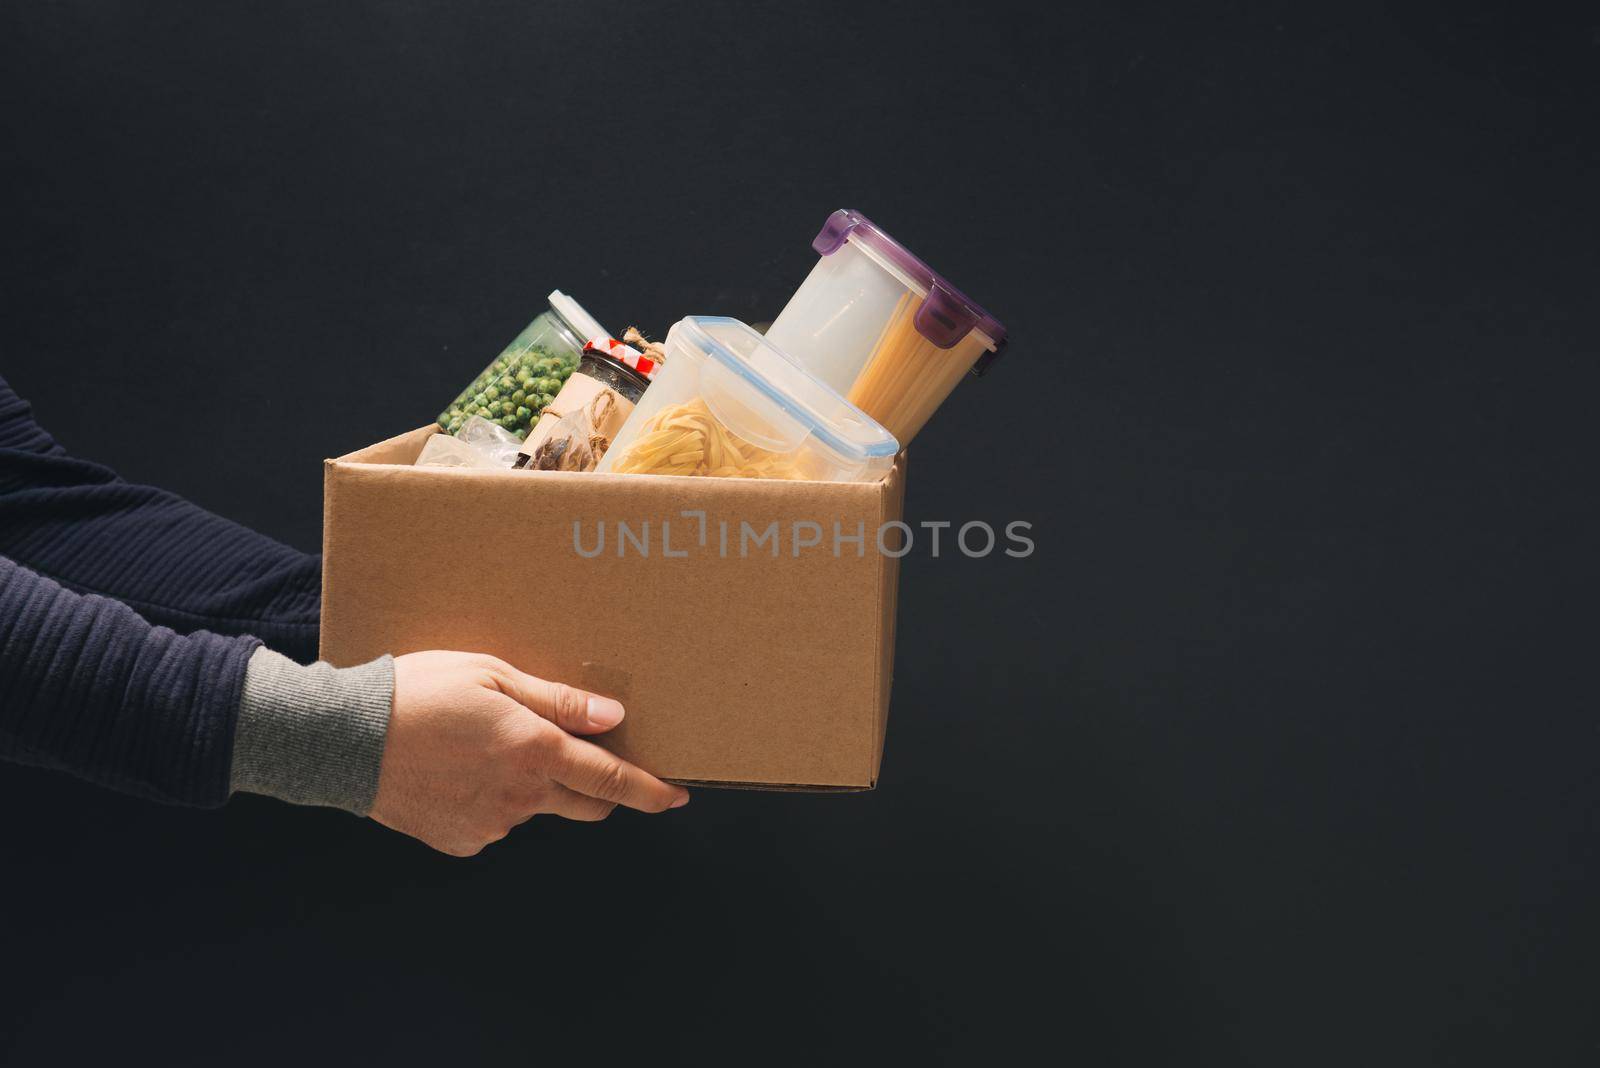 A man holding a donation box of different products on dark background by makidotvn